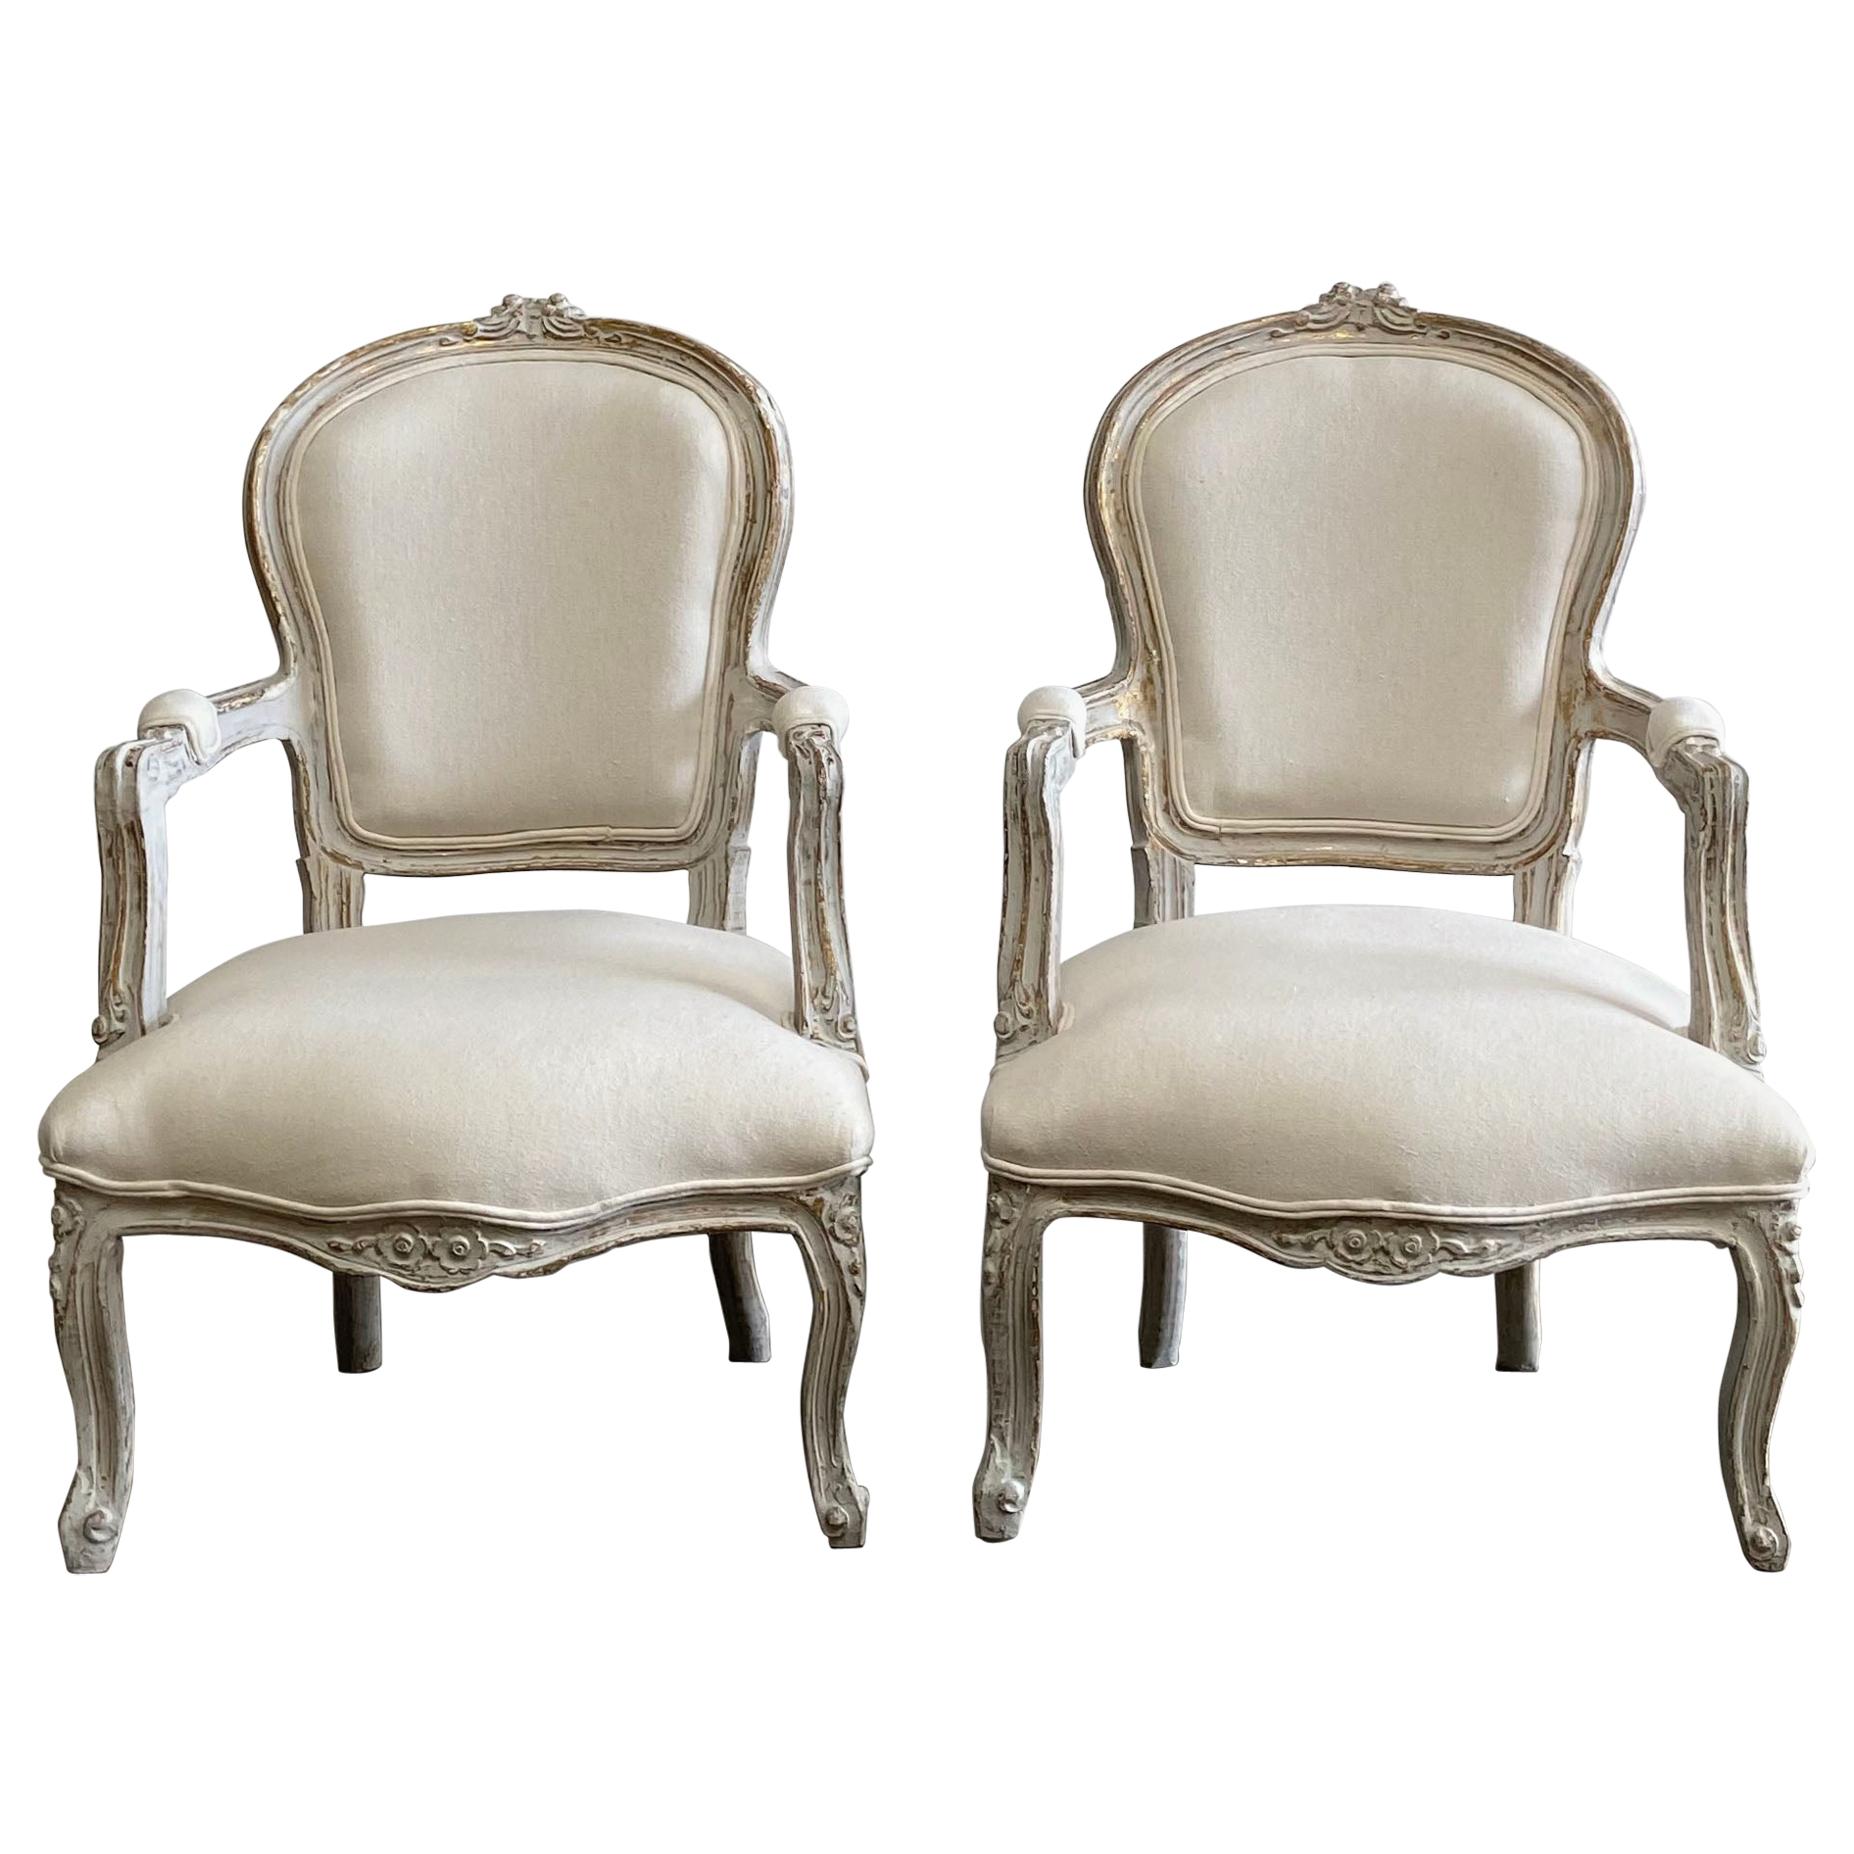 Vintage Pair of Painted and Upholstered Louis XV Style Open Armchairs